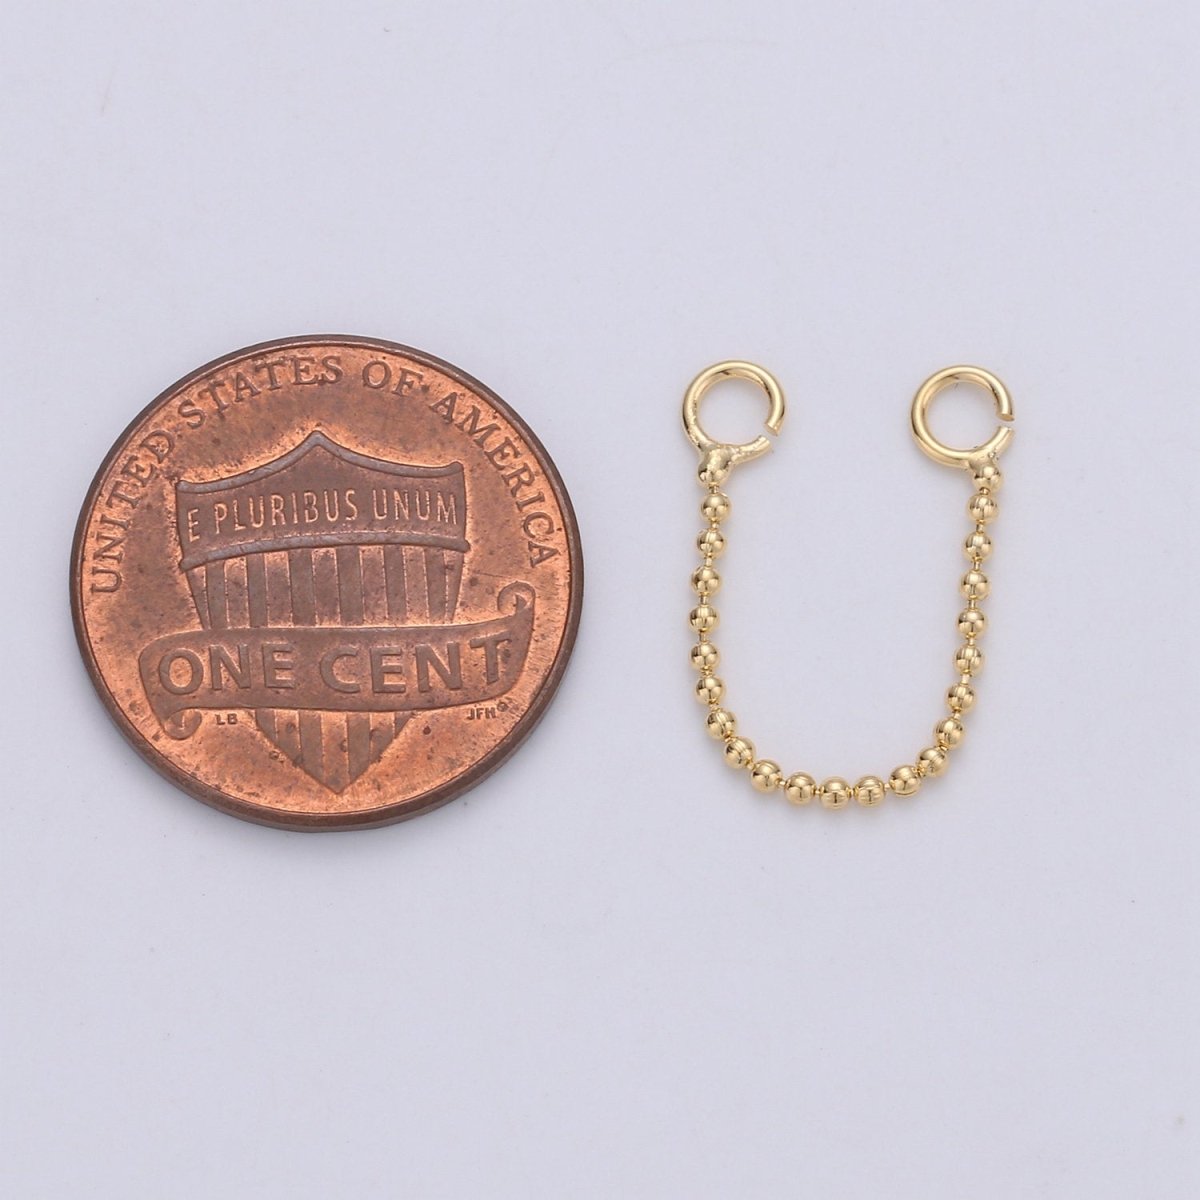 Real Gold Plated Earring Single Link Chain Connector for Earring Finding Jewelry Supply Lead free Nickel Free K-418 - DLUXCA